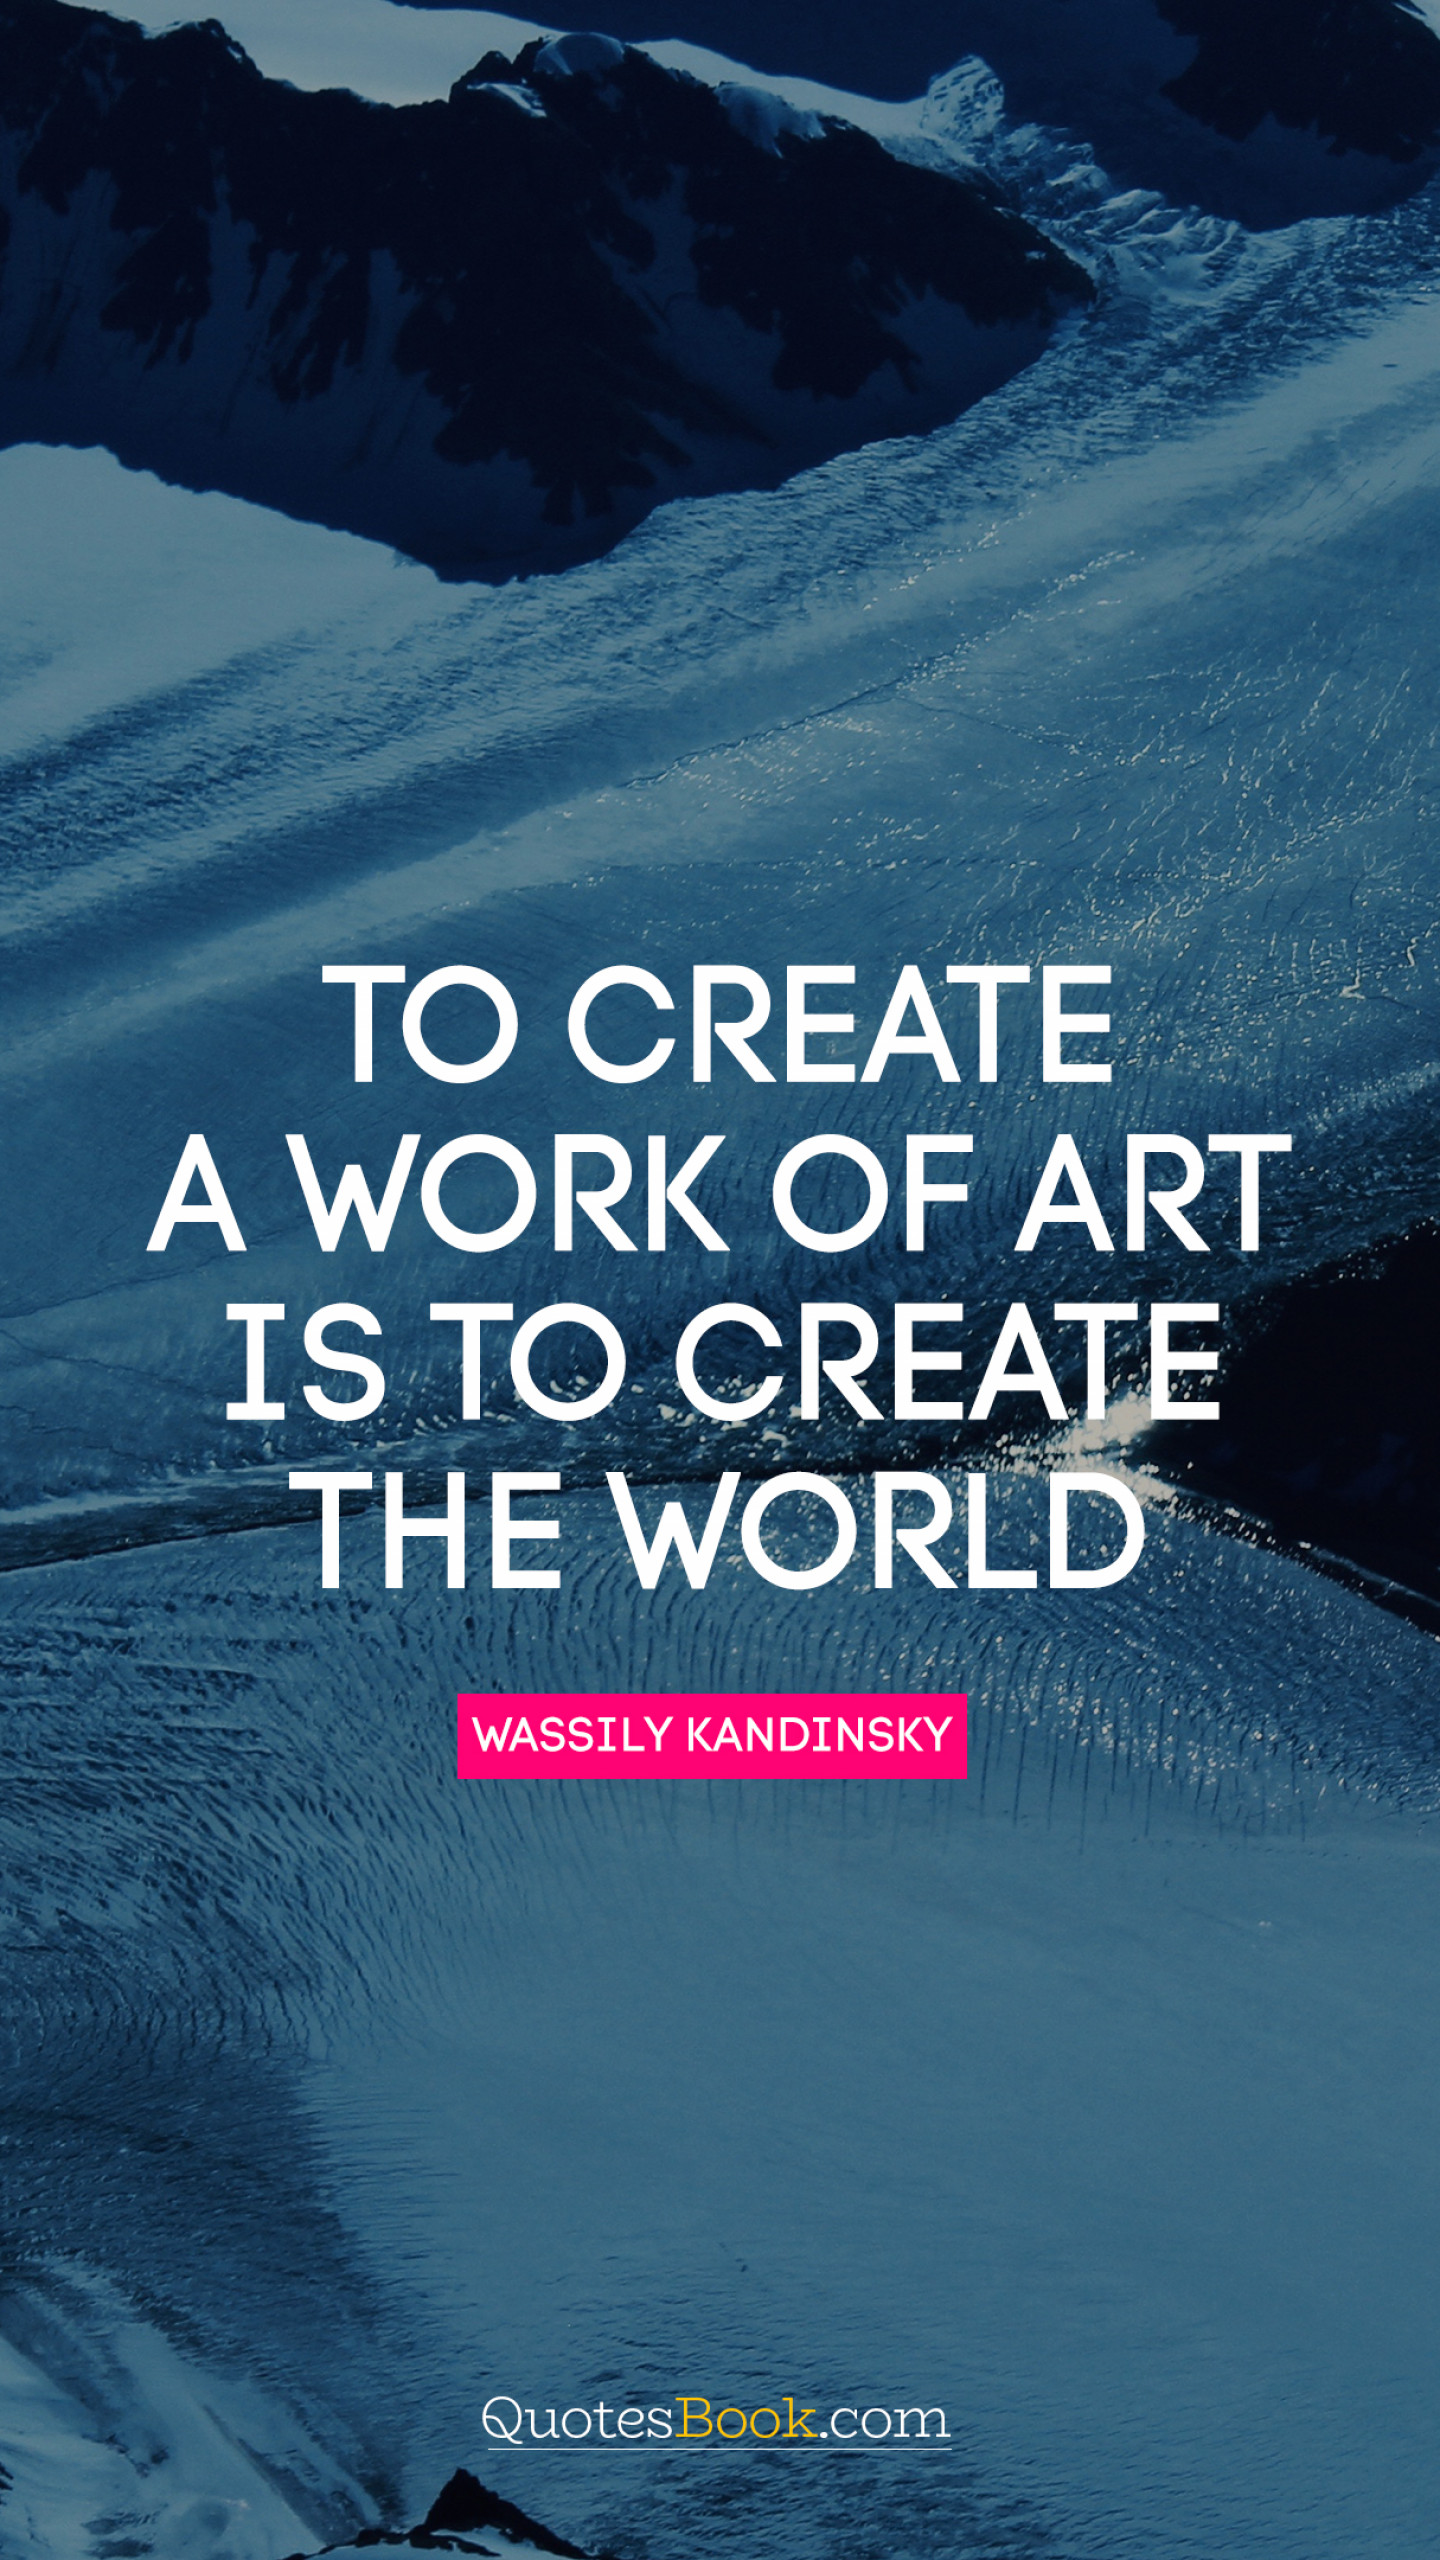 To create a work of art is to create the world. - Quote by Wassily